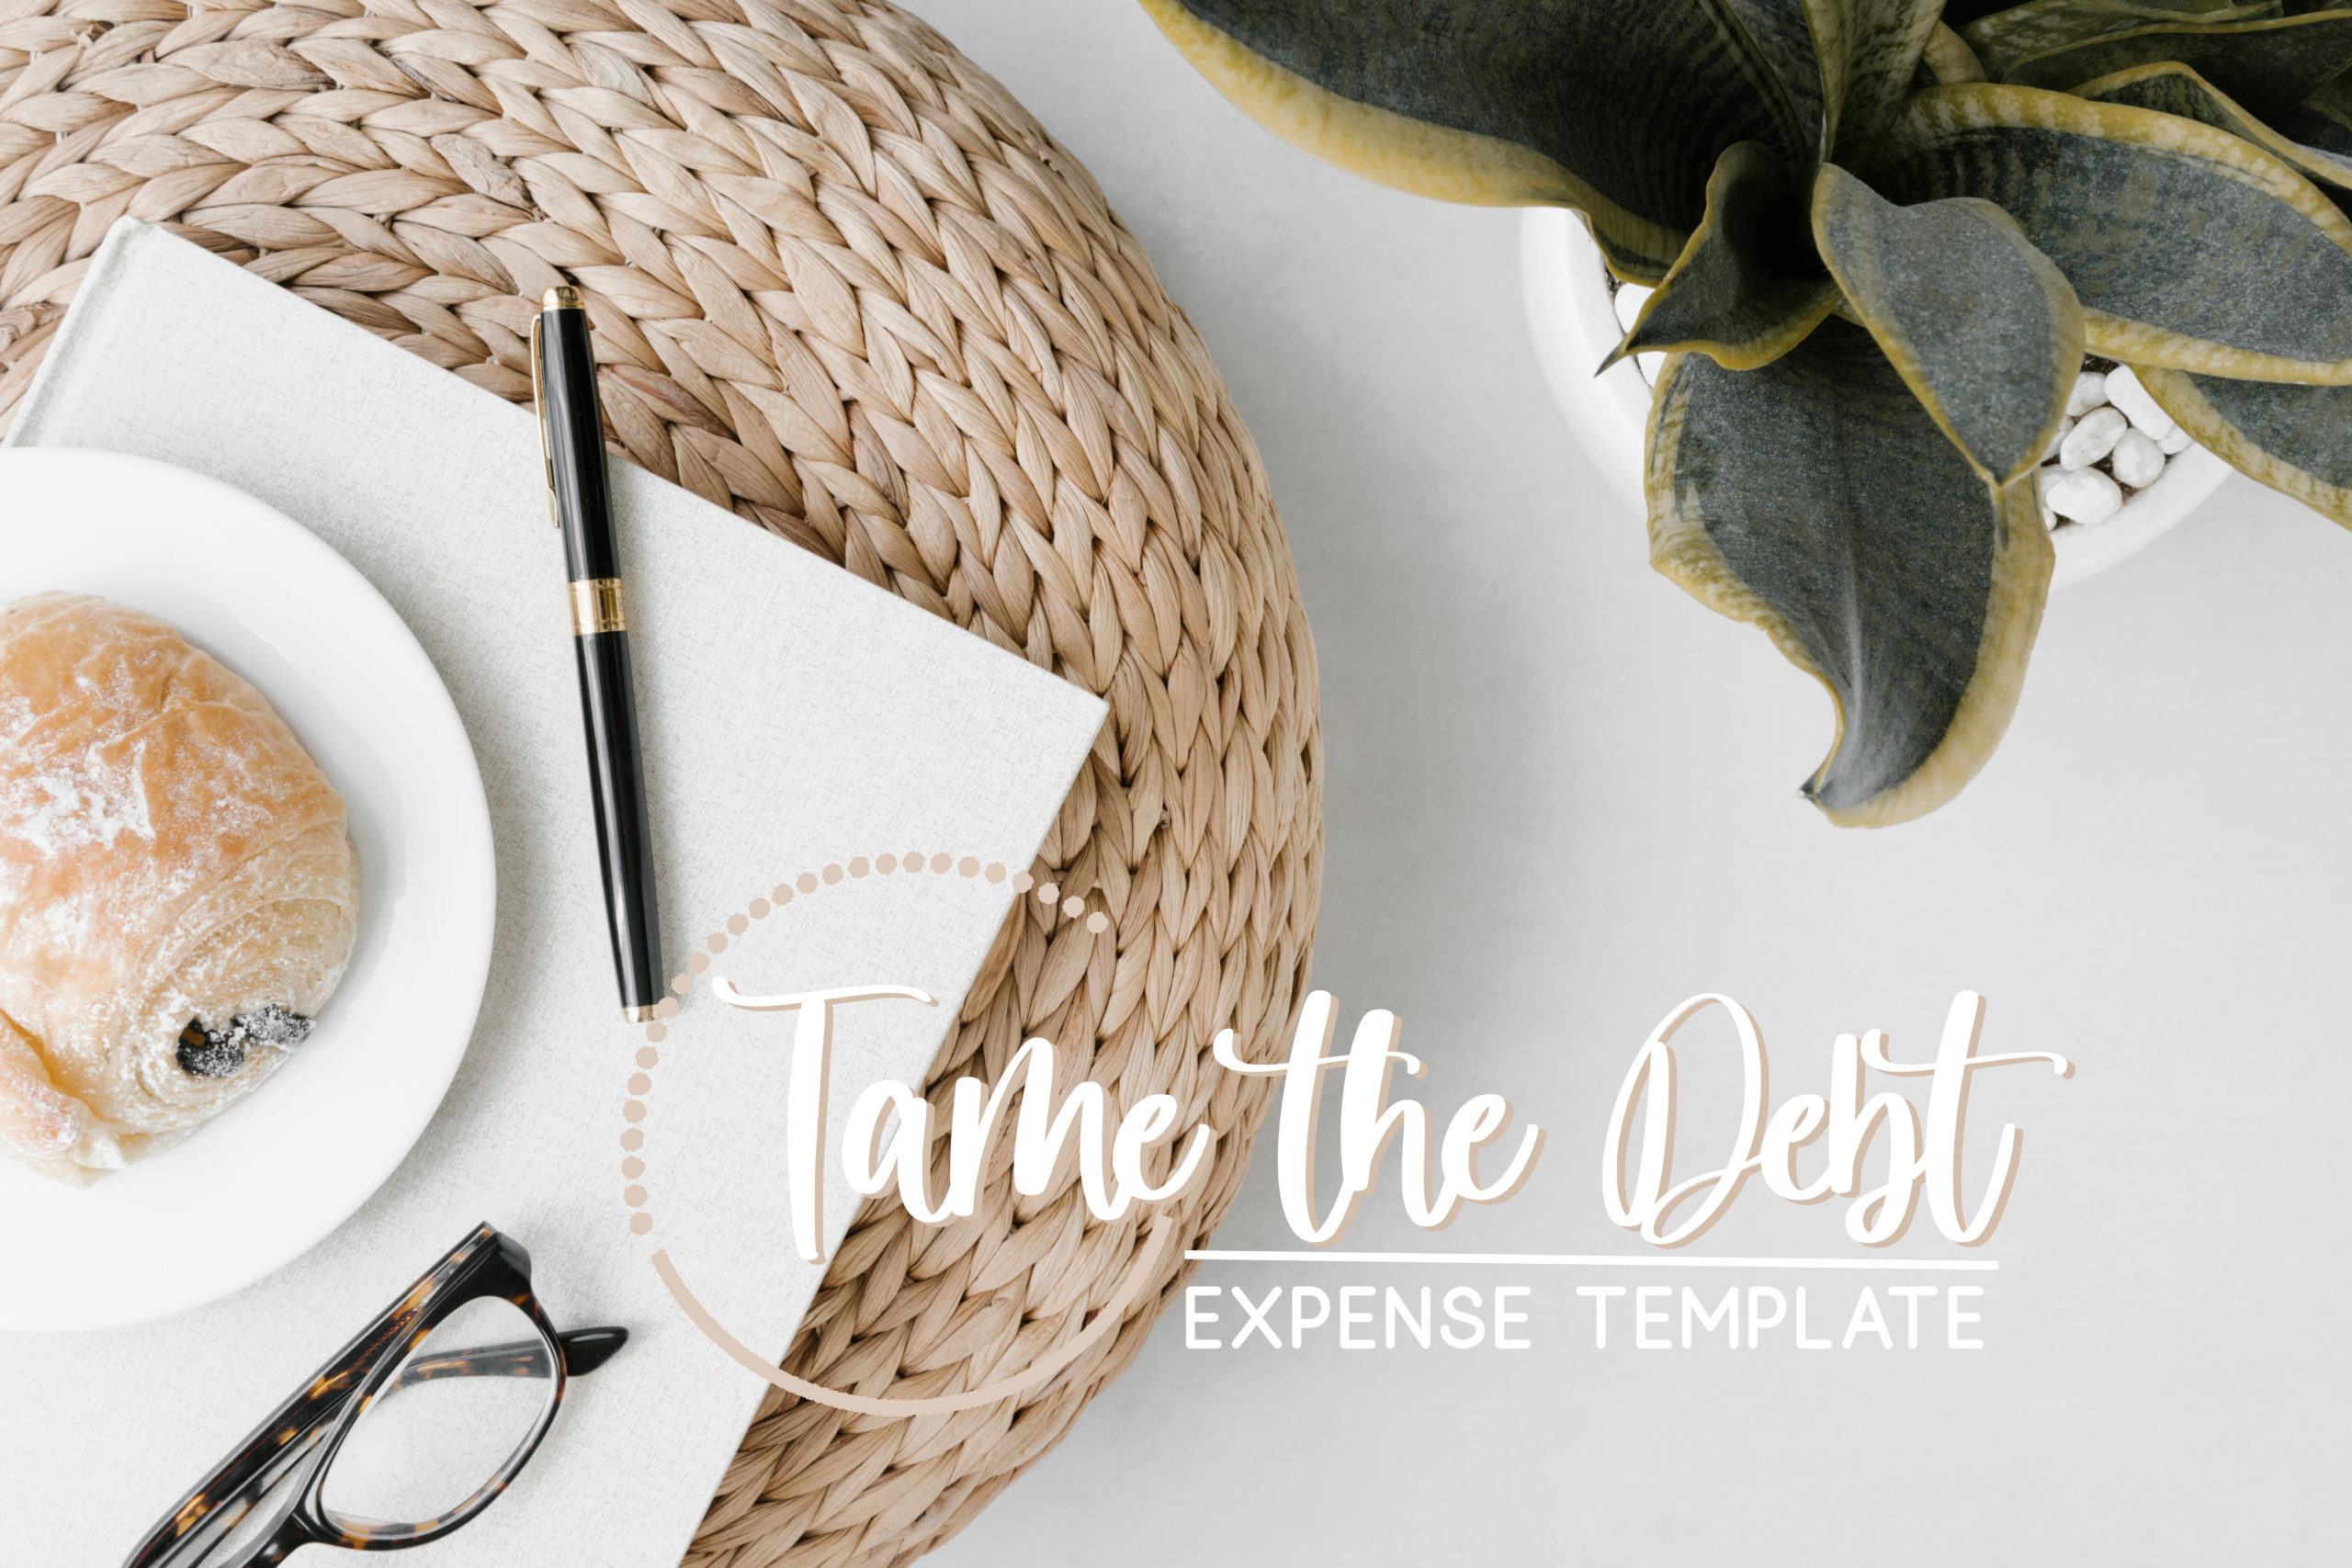 Taming The Debt: My Expense Template